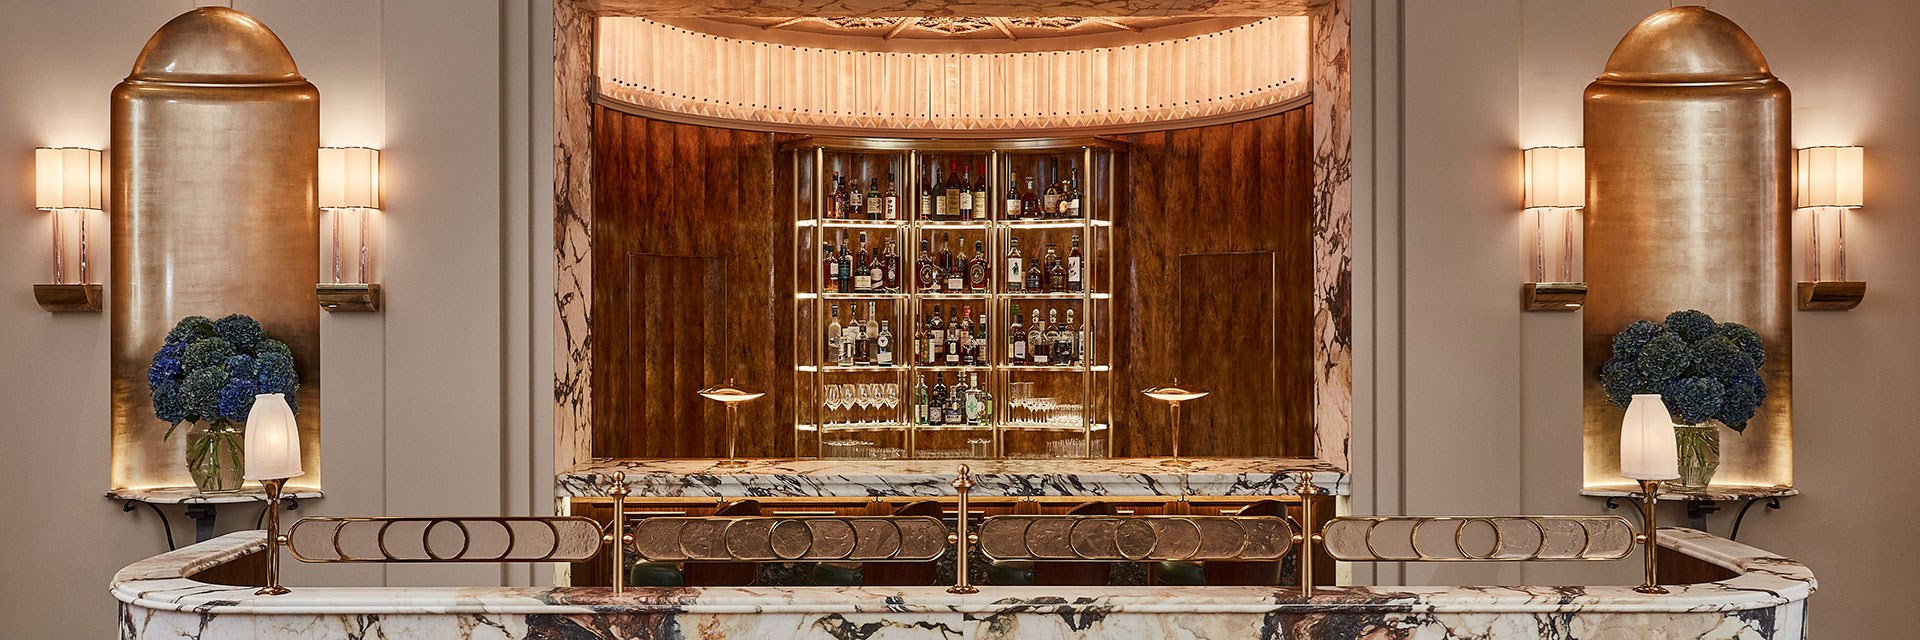 The bar at Claridge's Restaurant with bottles and bar stools